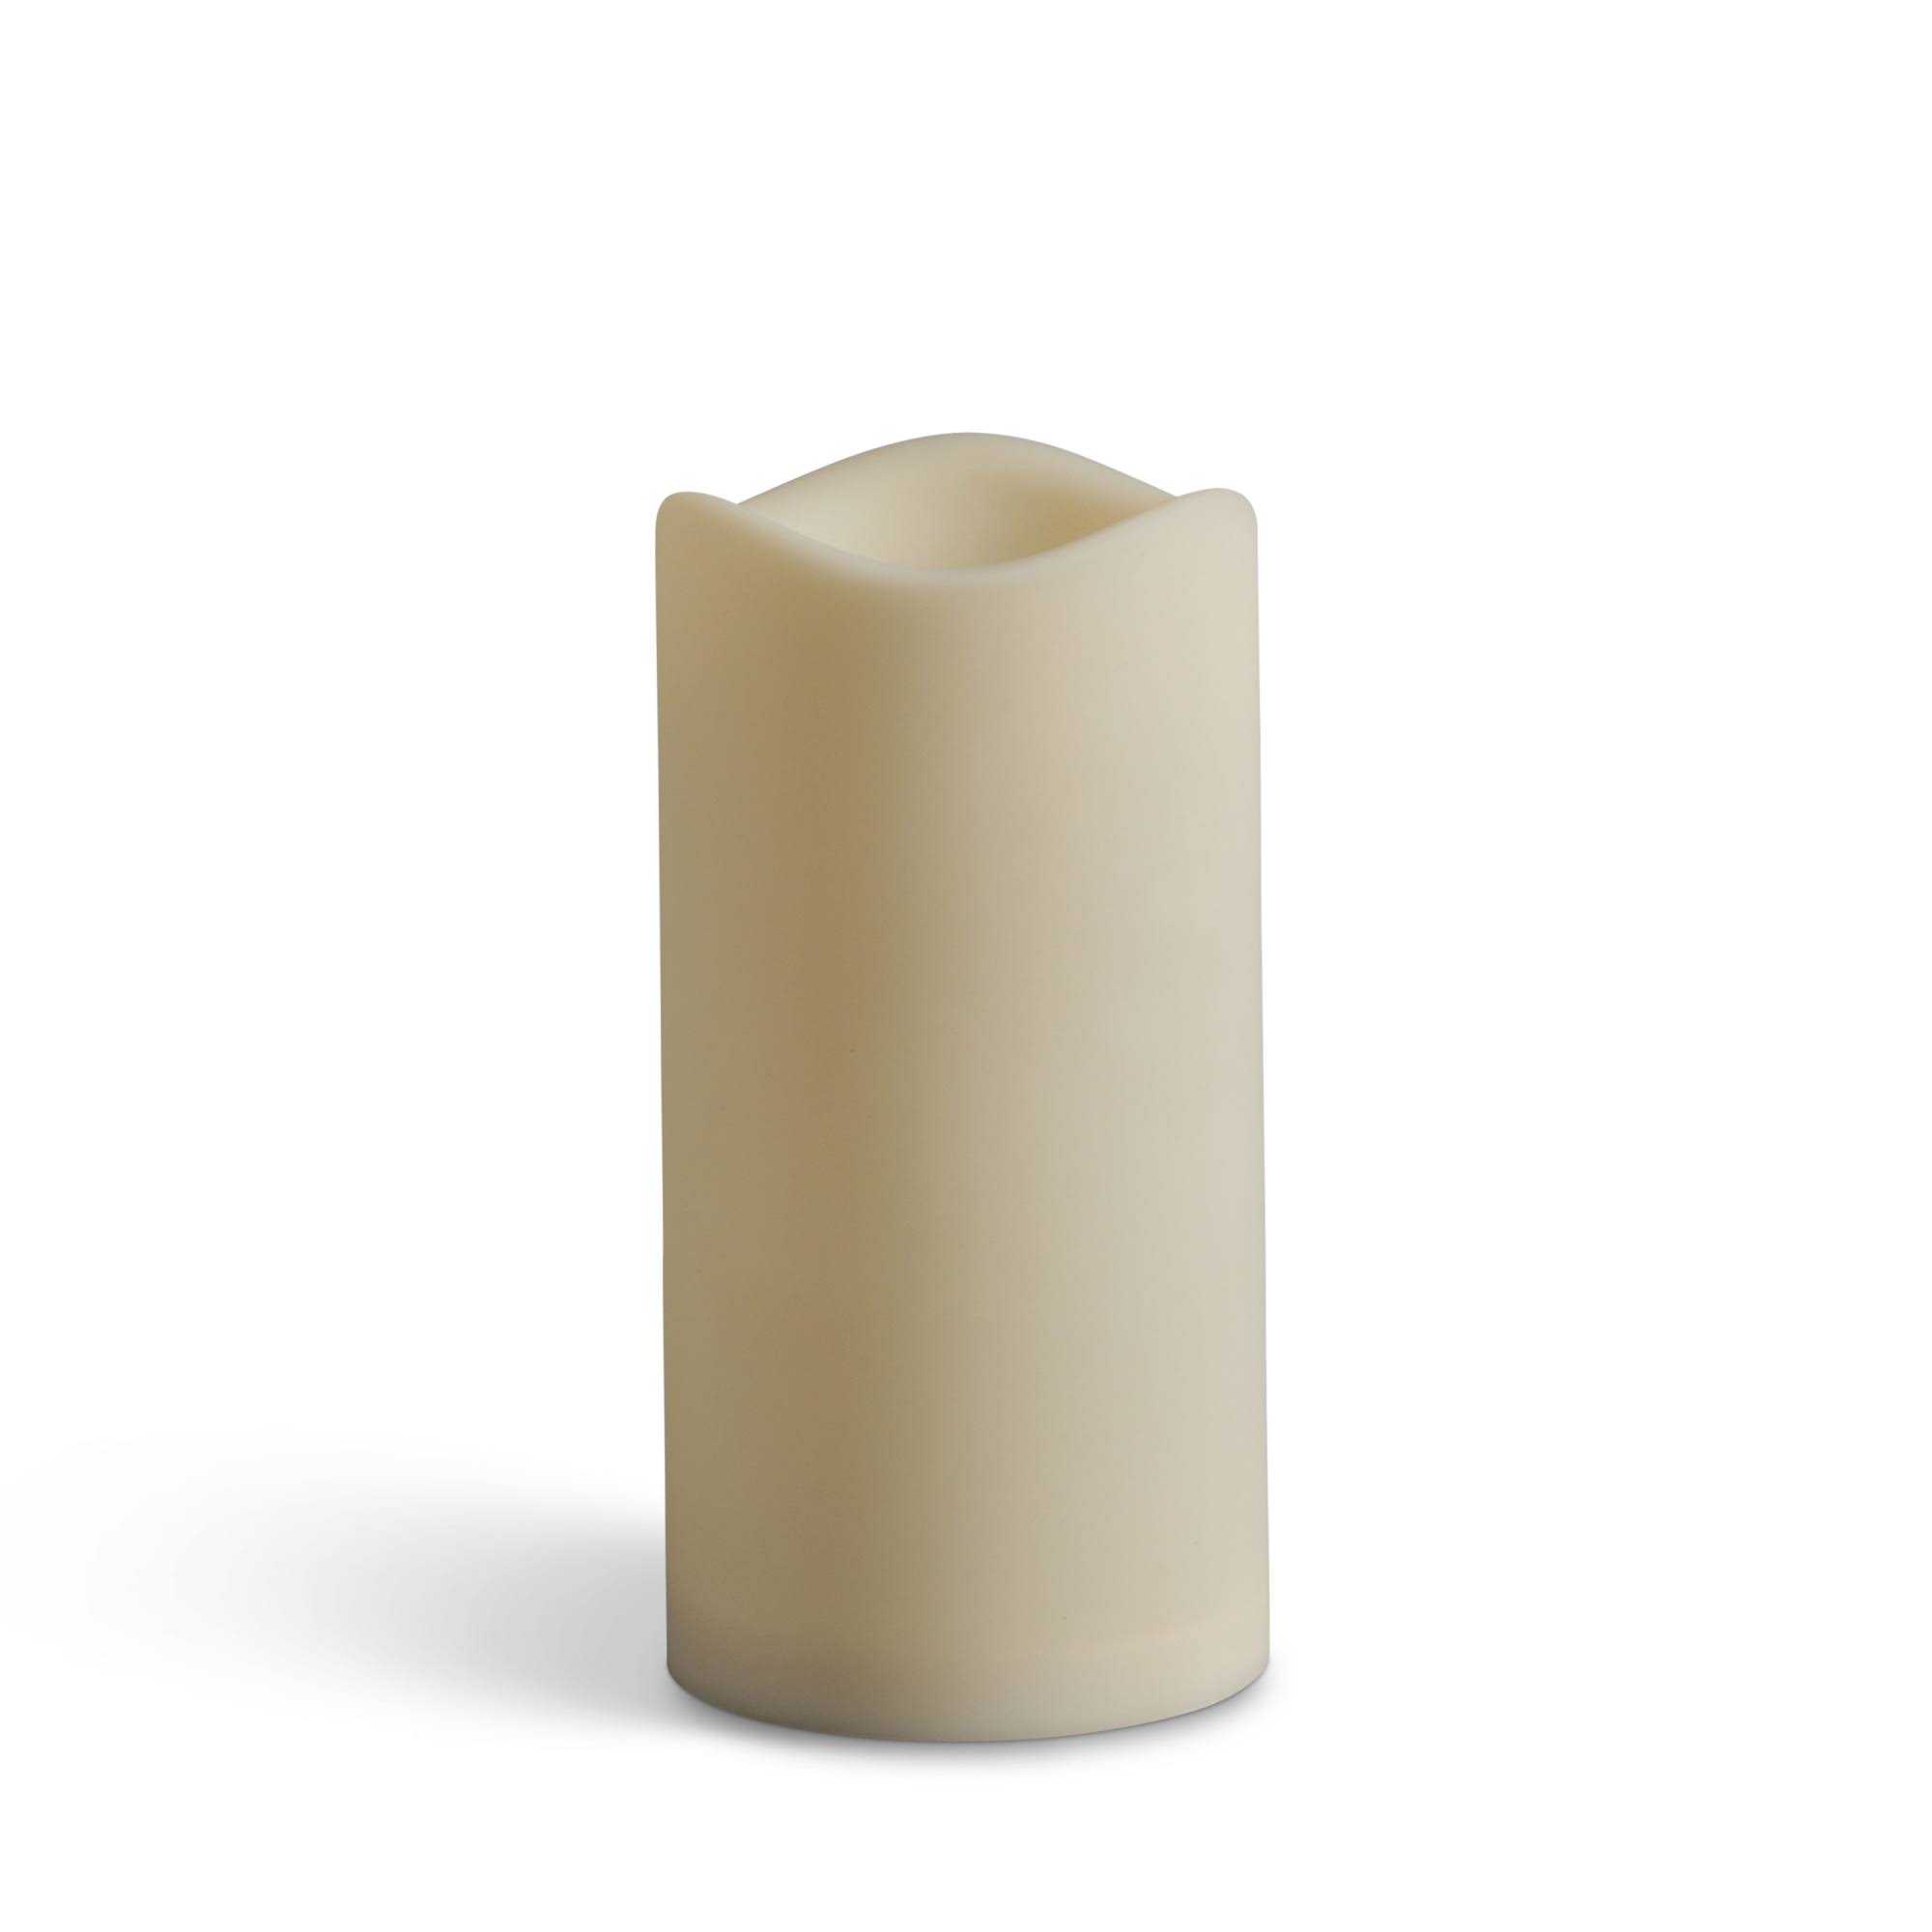 Everlasting Glow Resin LED Pillar Candle with Soft Glow Flicker and Timer - 3in x 6in